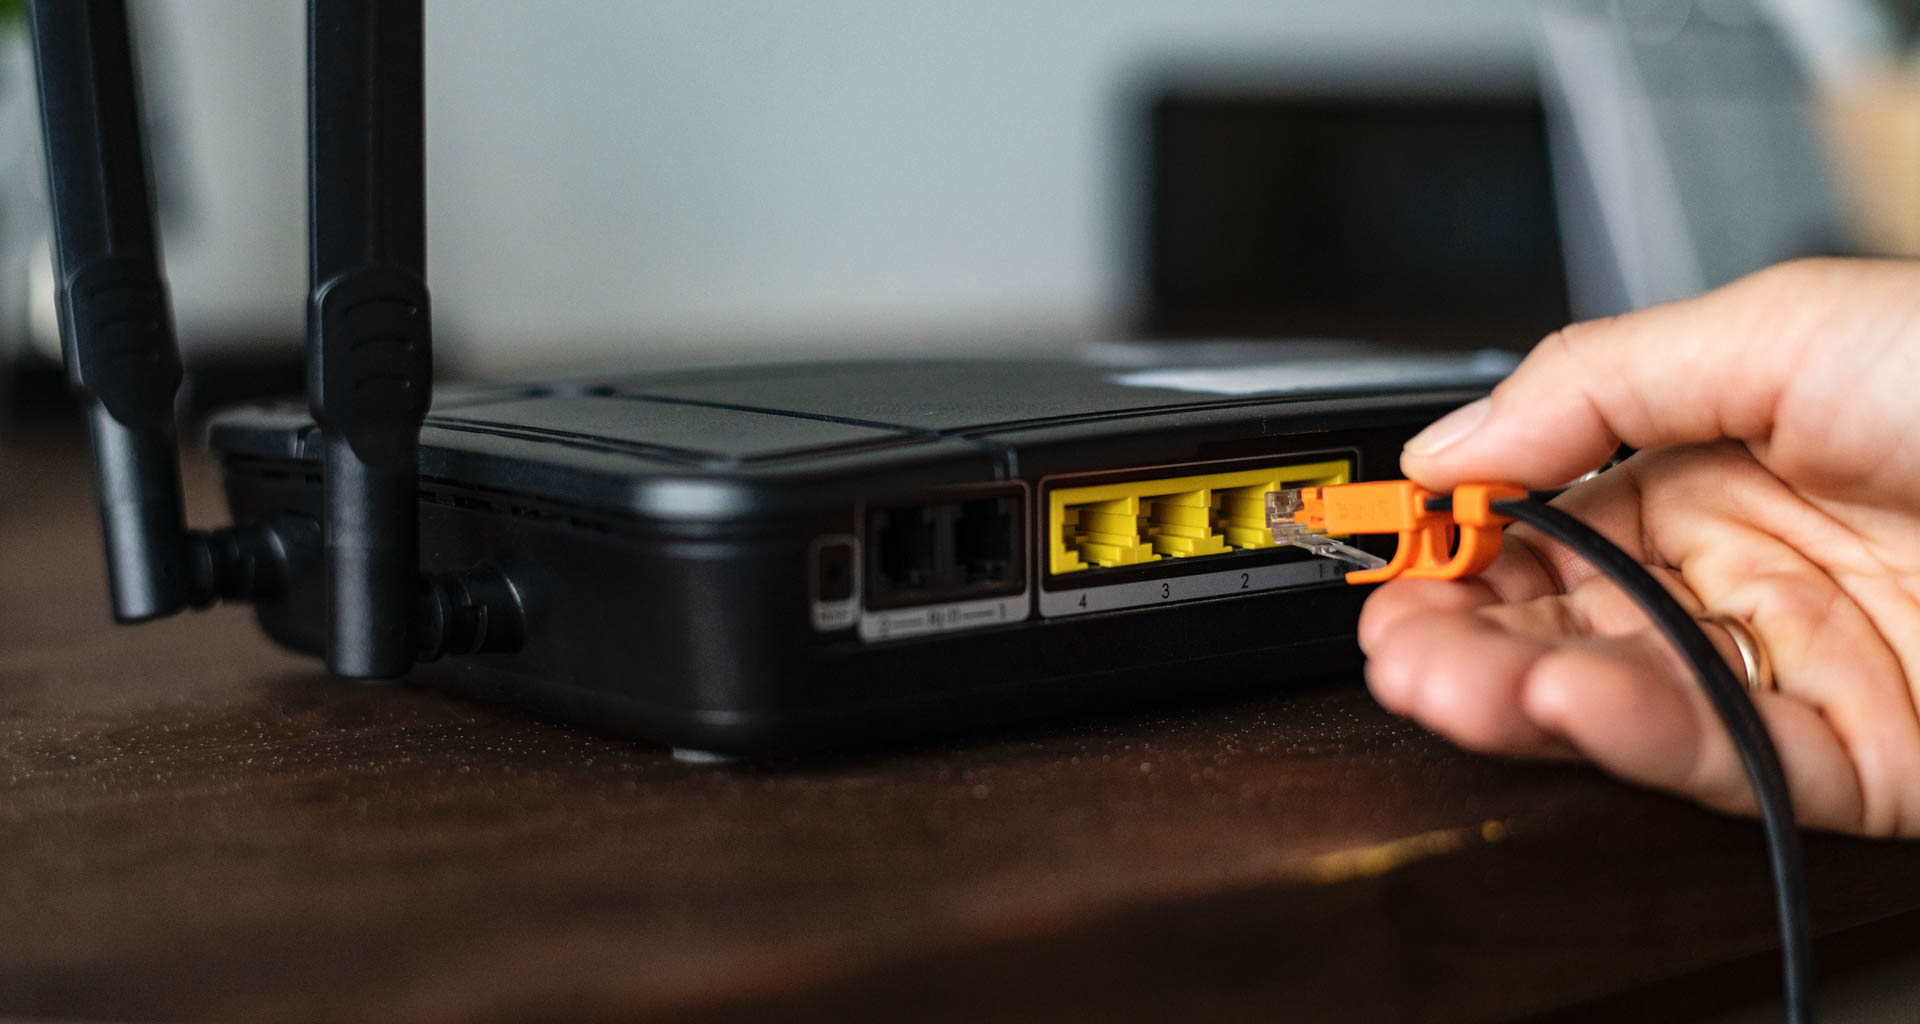 Your older router can be a limiting factor in your bandwidth. Most current routers will be able to keep up with whatever Internet package you choose. Image: rawpixel on Unsplash.